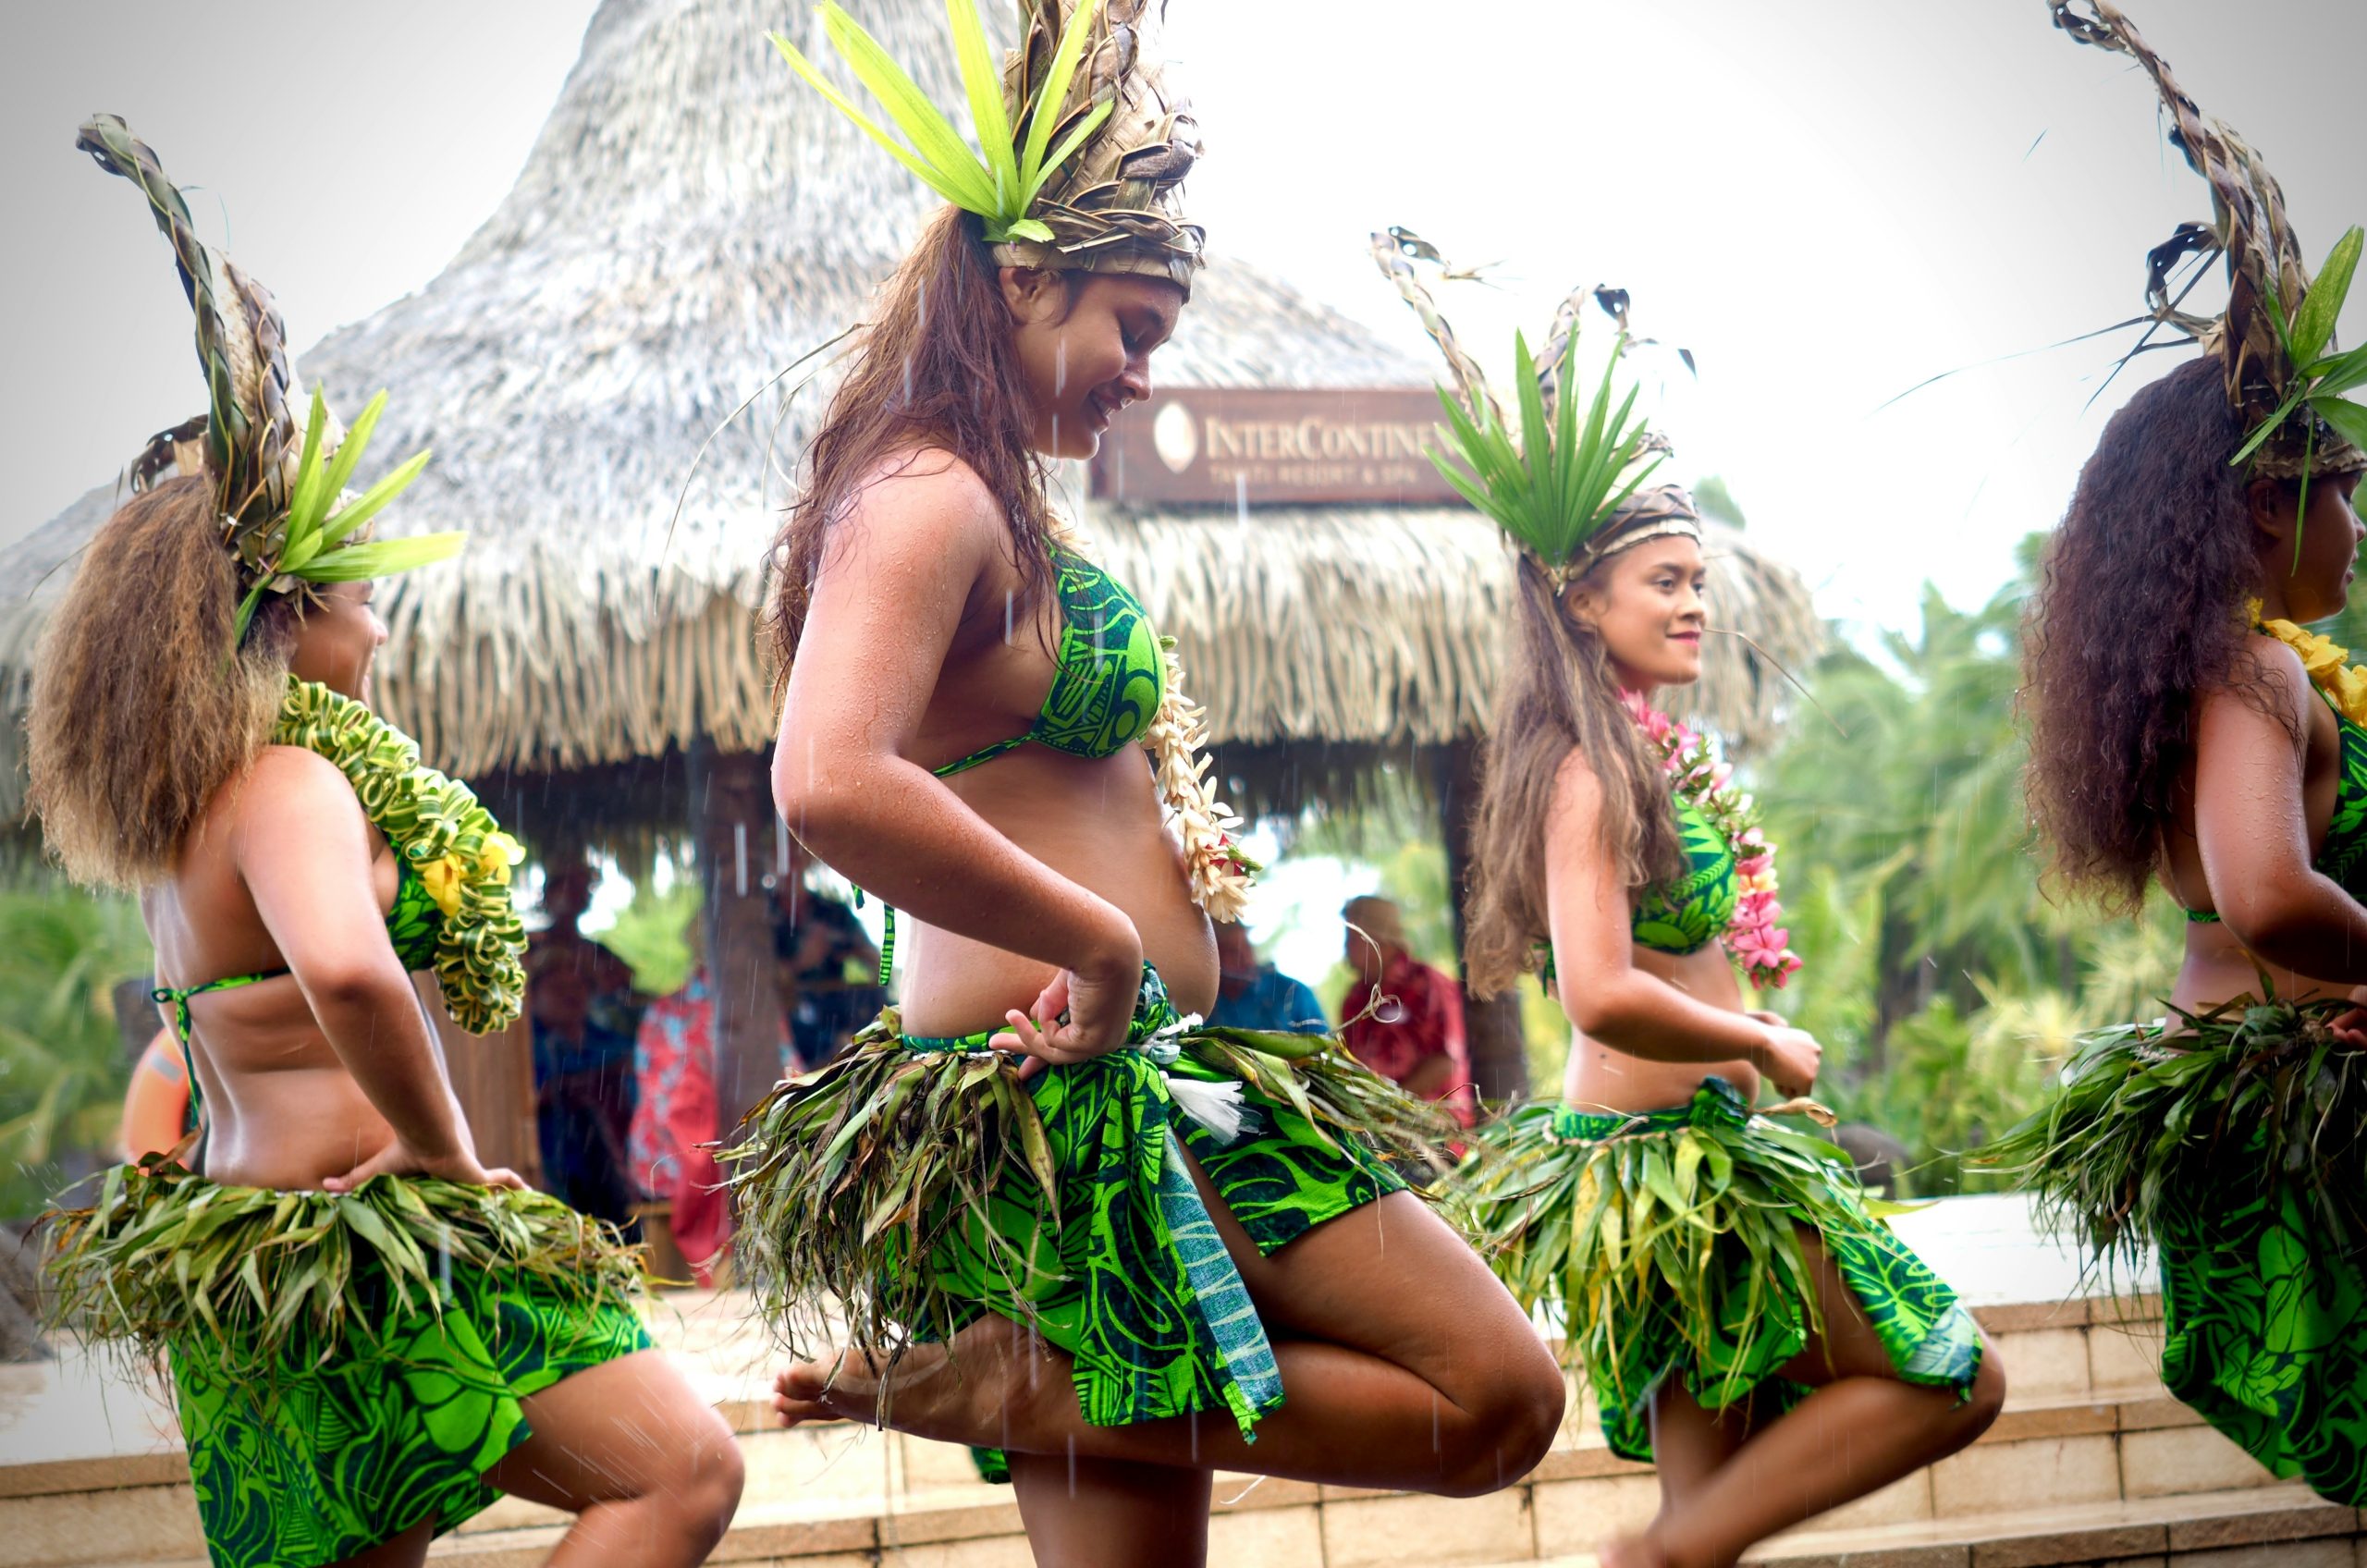 discover the magic of tahiti with a unique tourism experience. explore pristine beaches, vibrant culture, and breathtaking natural beauty.